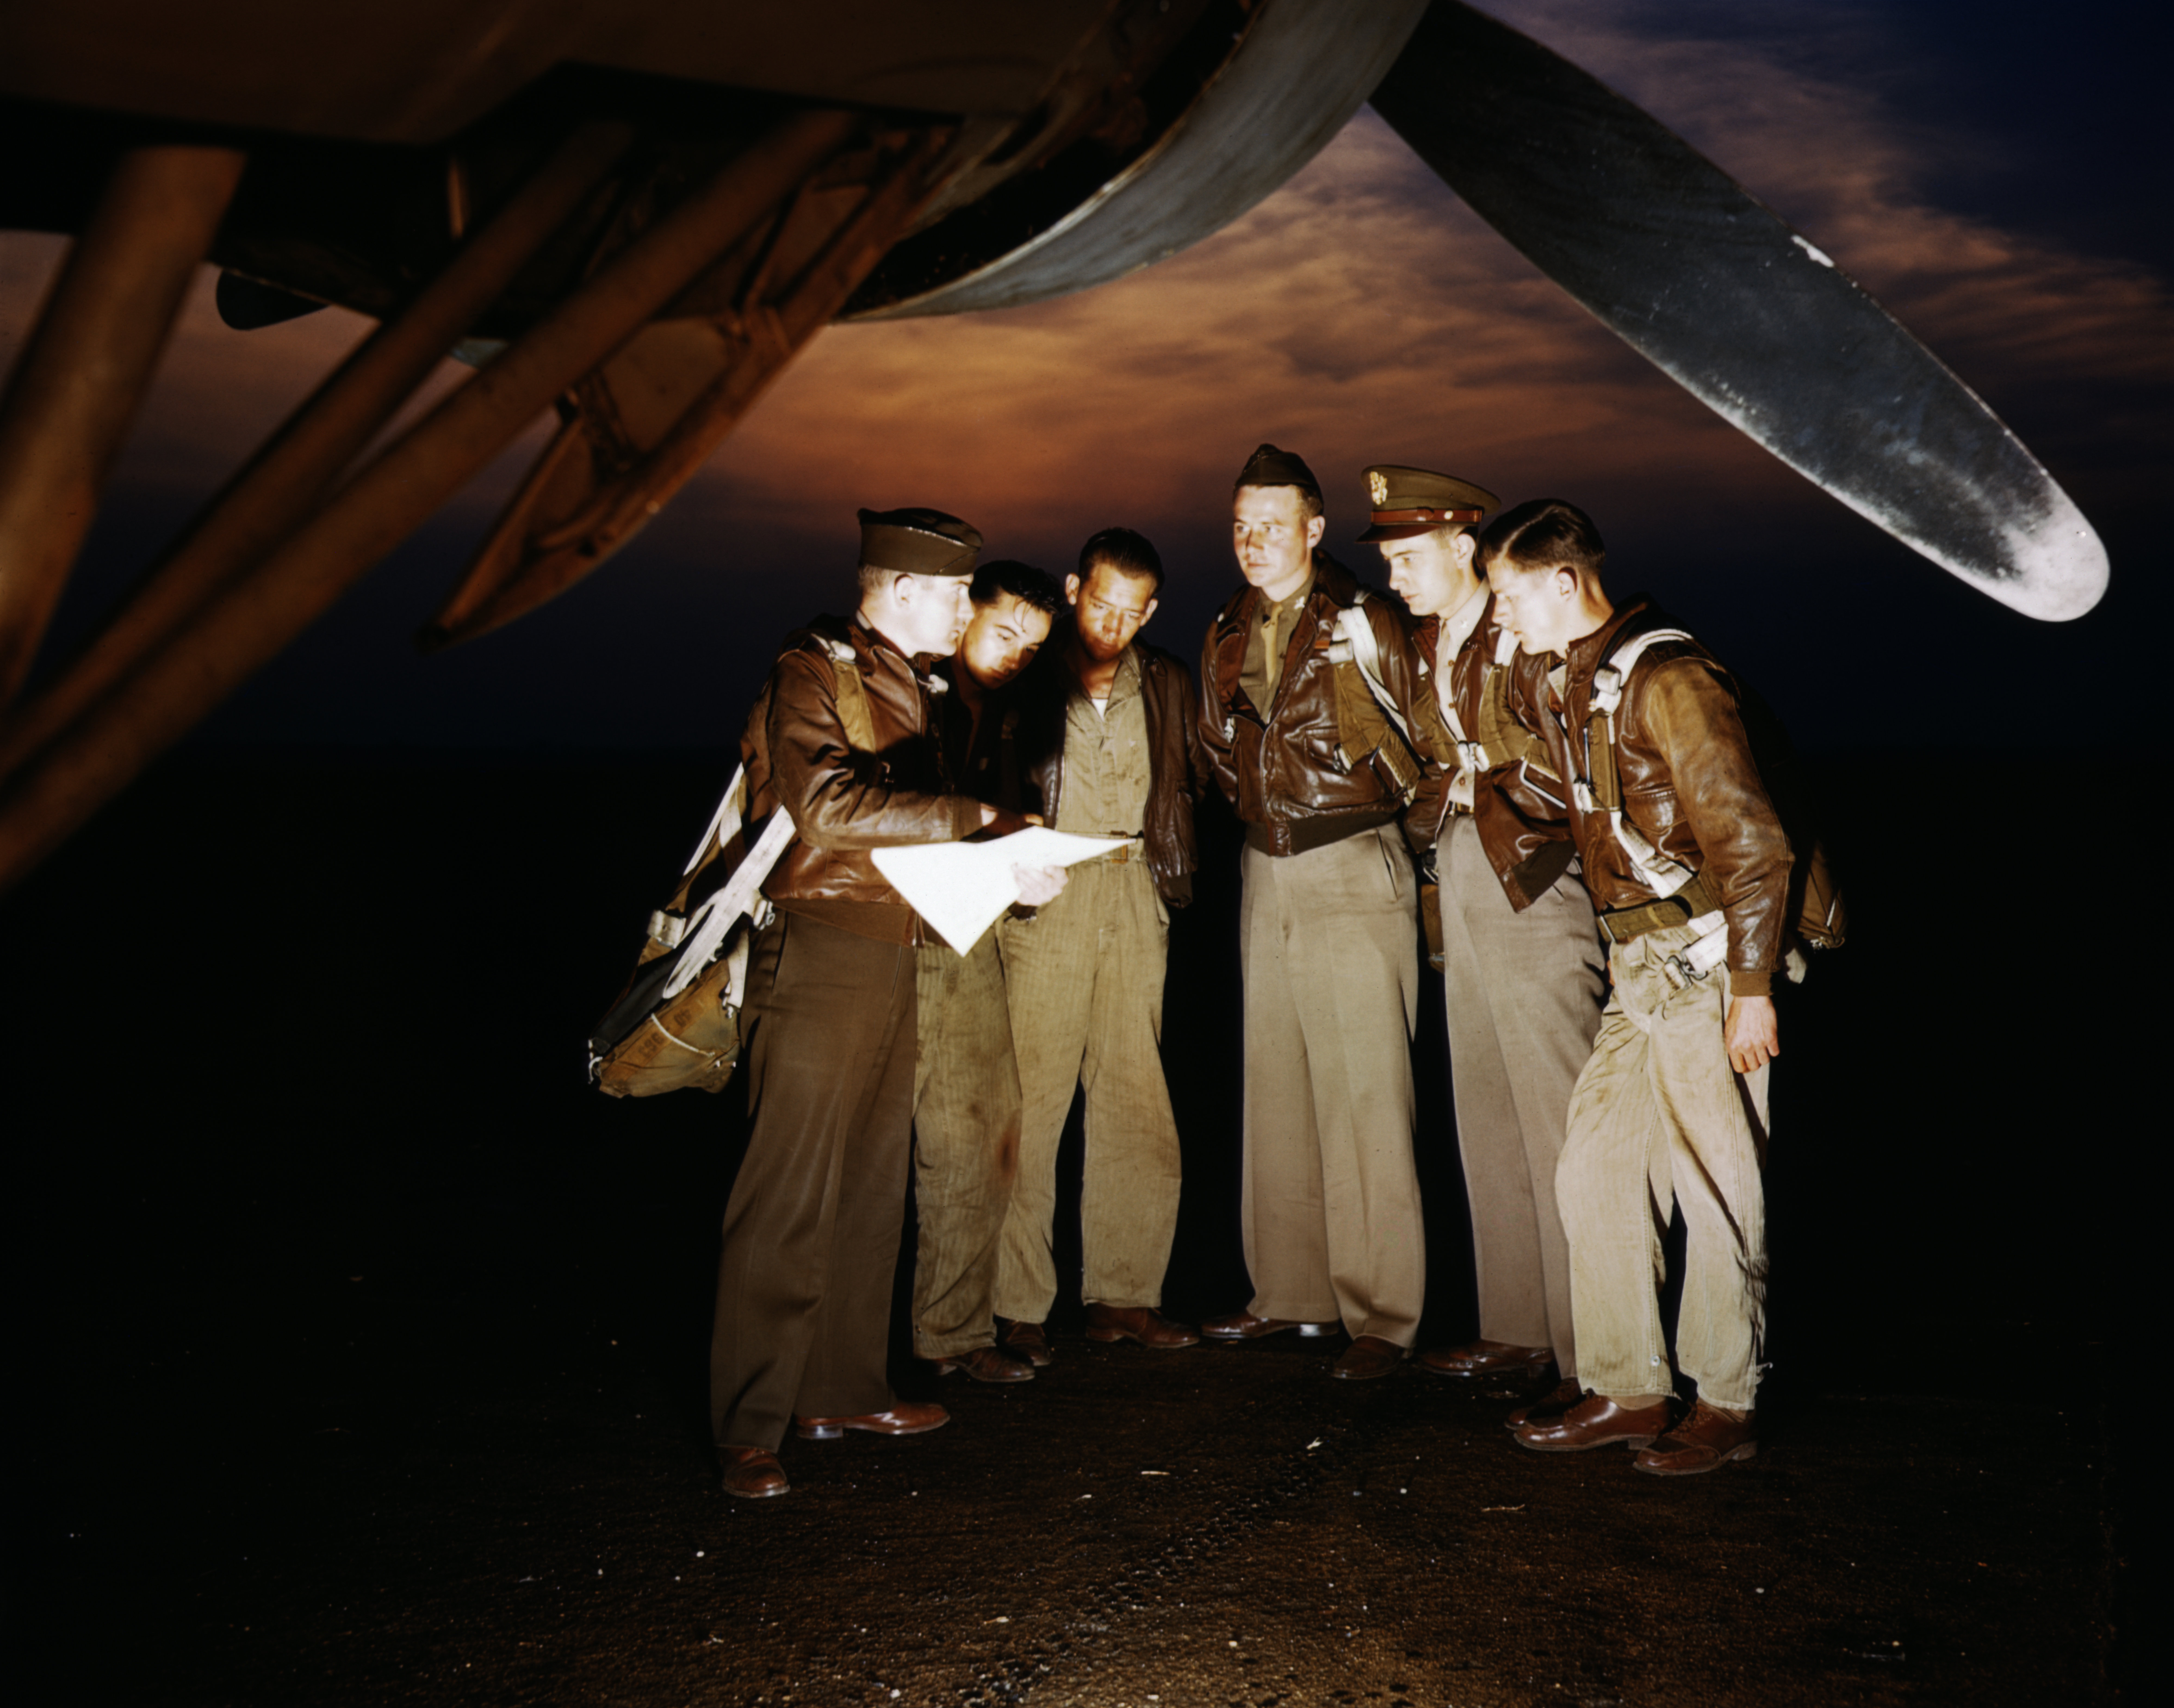 American YB-17 bomber crew receiving last minute instructions before taking off on a mission, Langley Field, Virginia, United States, May 1942